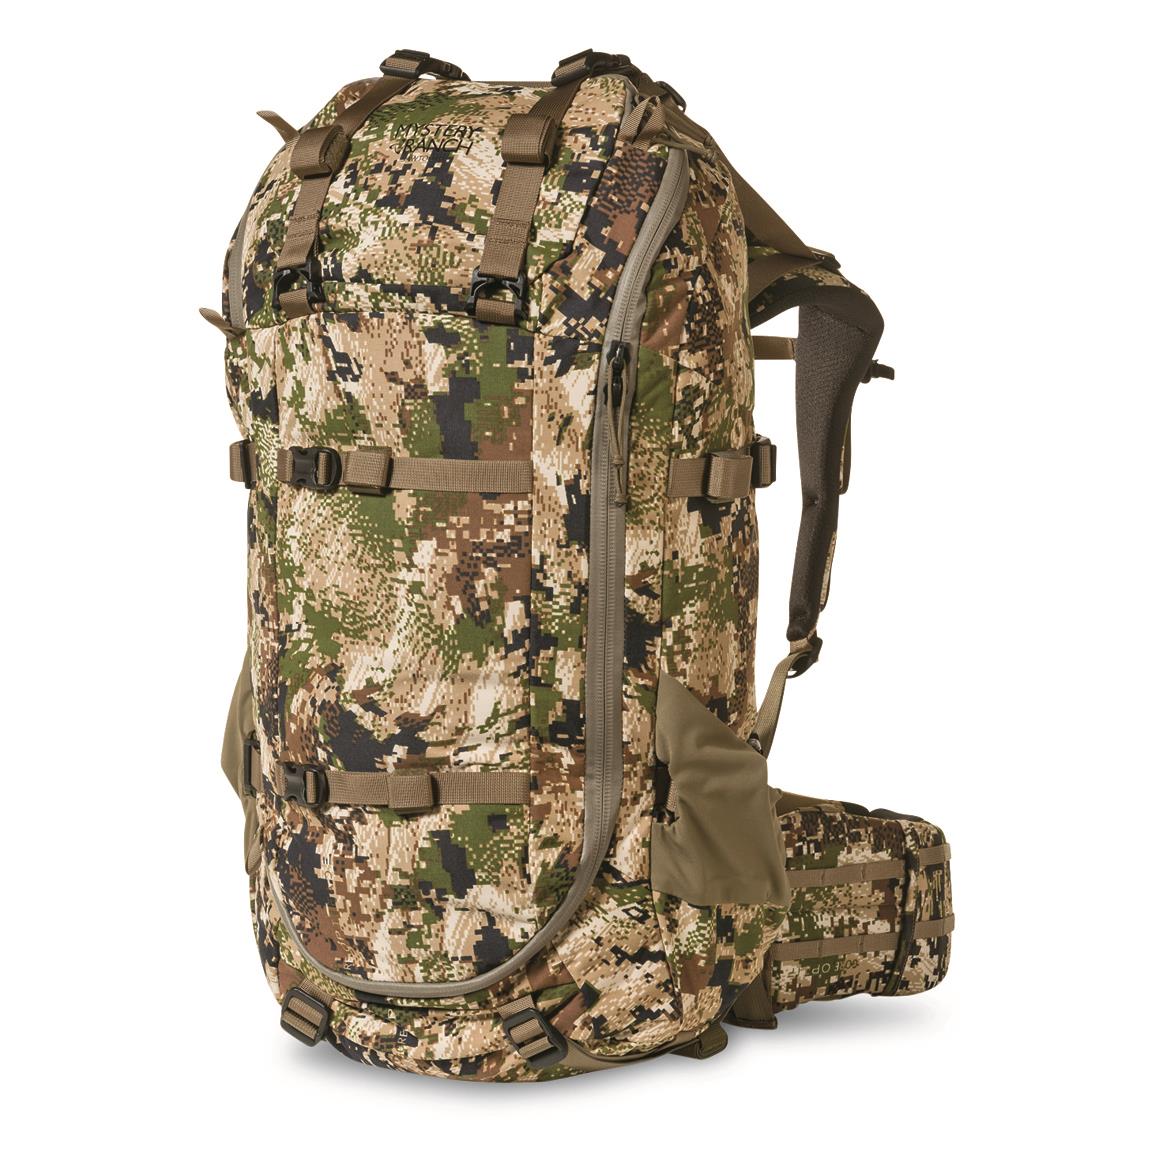 Mystery Ranch Sawtooth 45 Hunting Pack, GORE OPTIFADE Subalpine, GORE™ OPTIFADE™ Subalpine